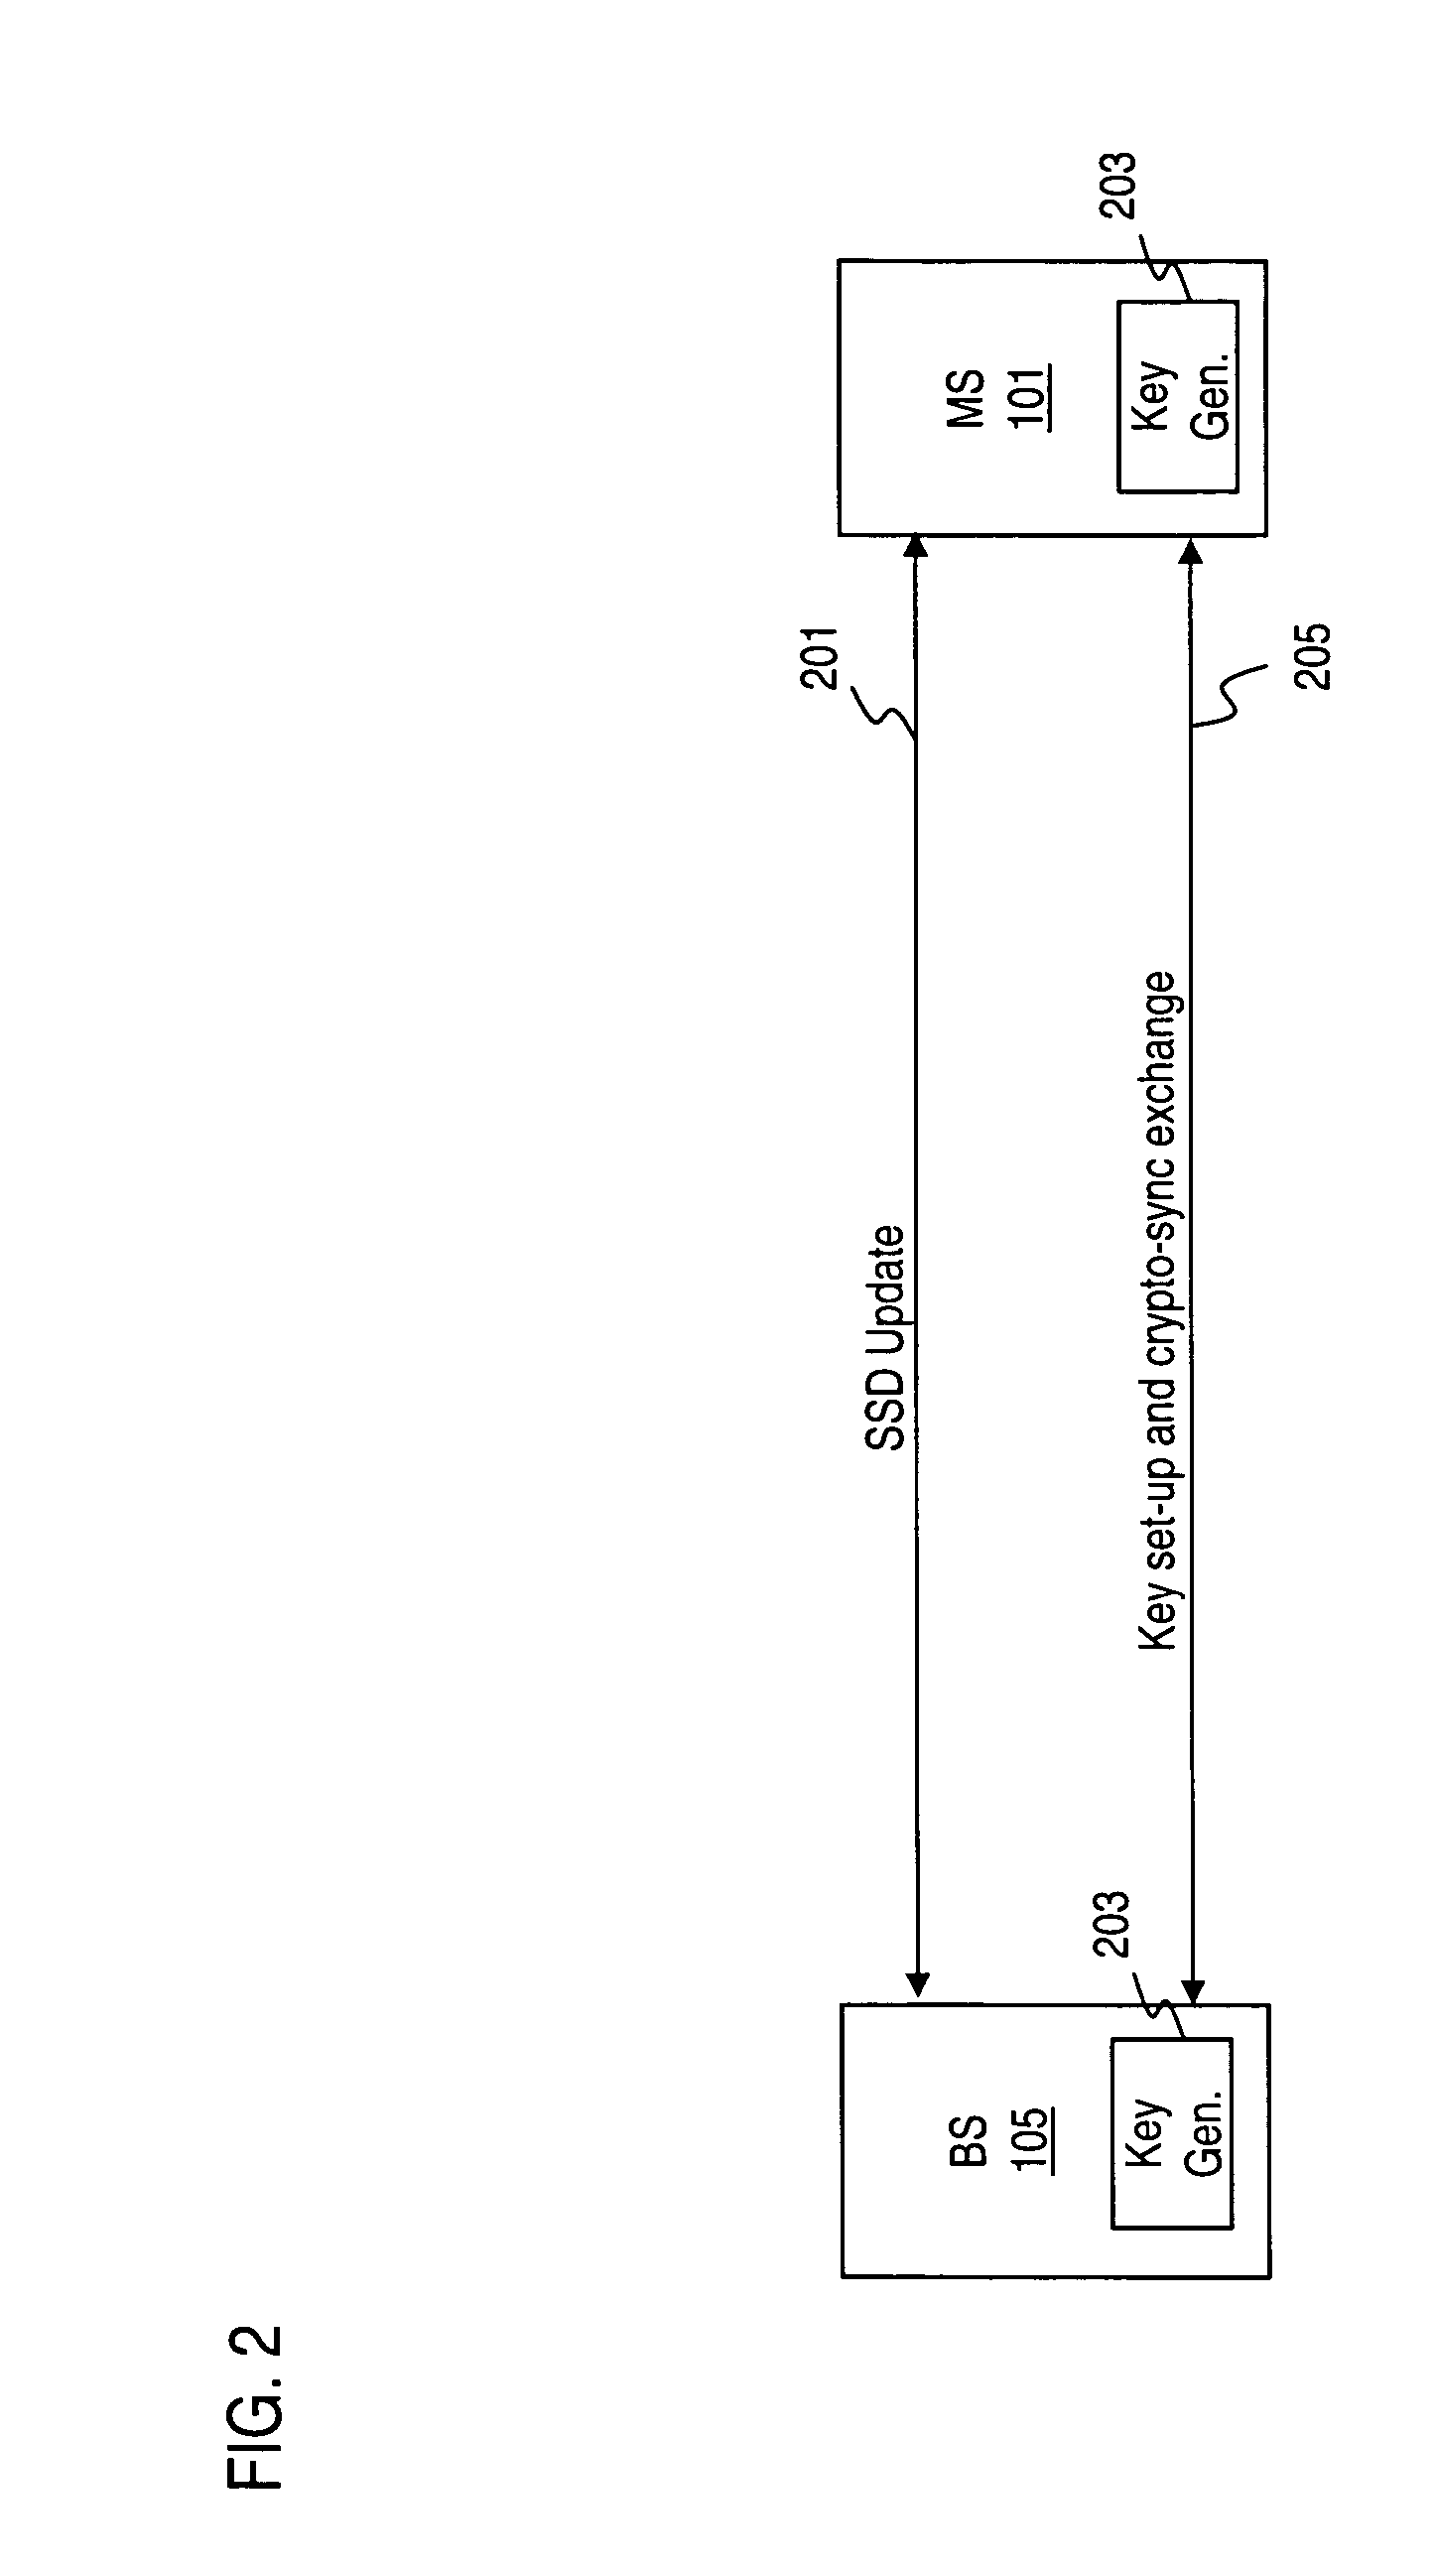 Method and apparatus for providing encryption and integrity key set-up